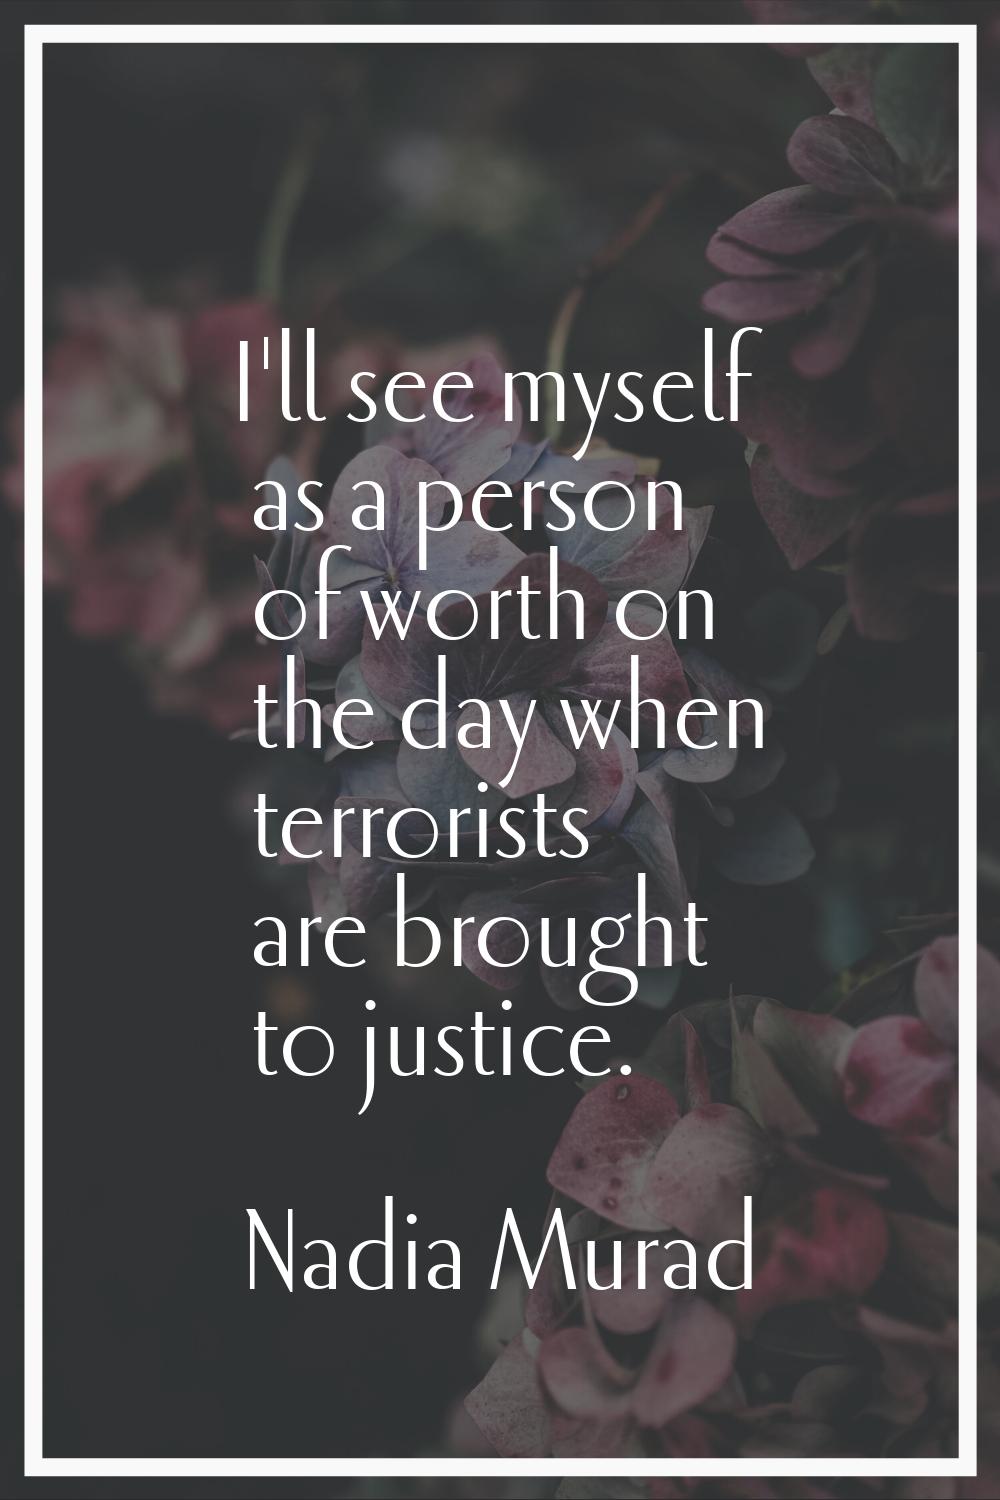 I'll see myself as a person of worth on the day when terrorists are brought to justice.